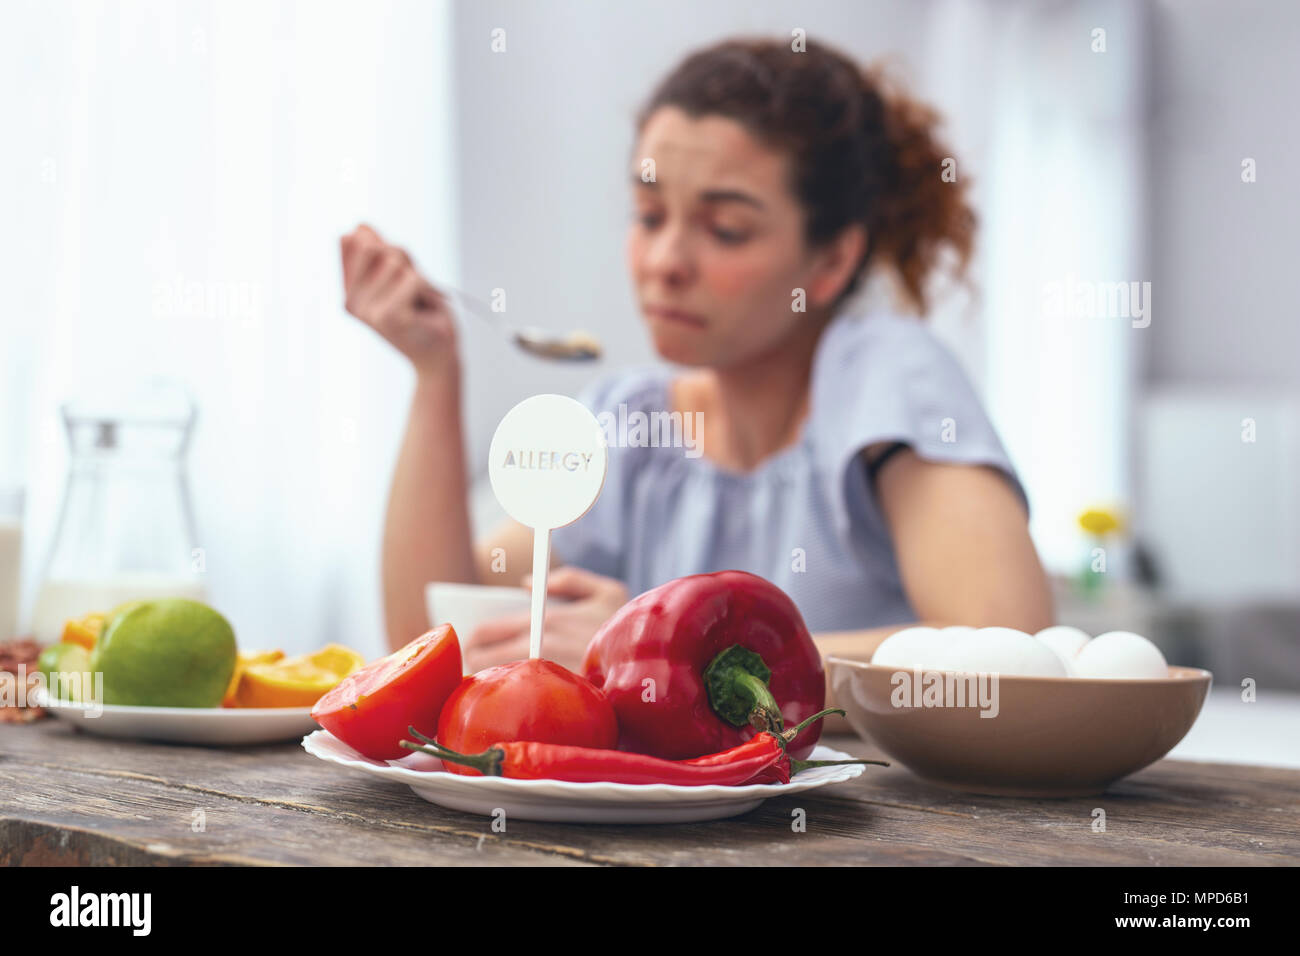 Young lady avoiding allergen products Stock Photo